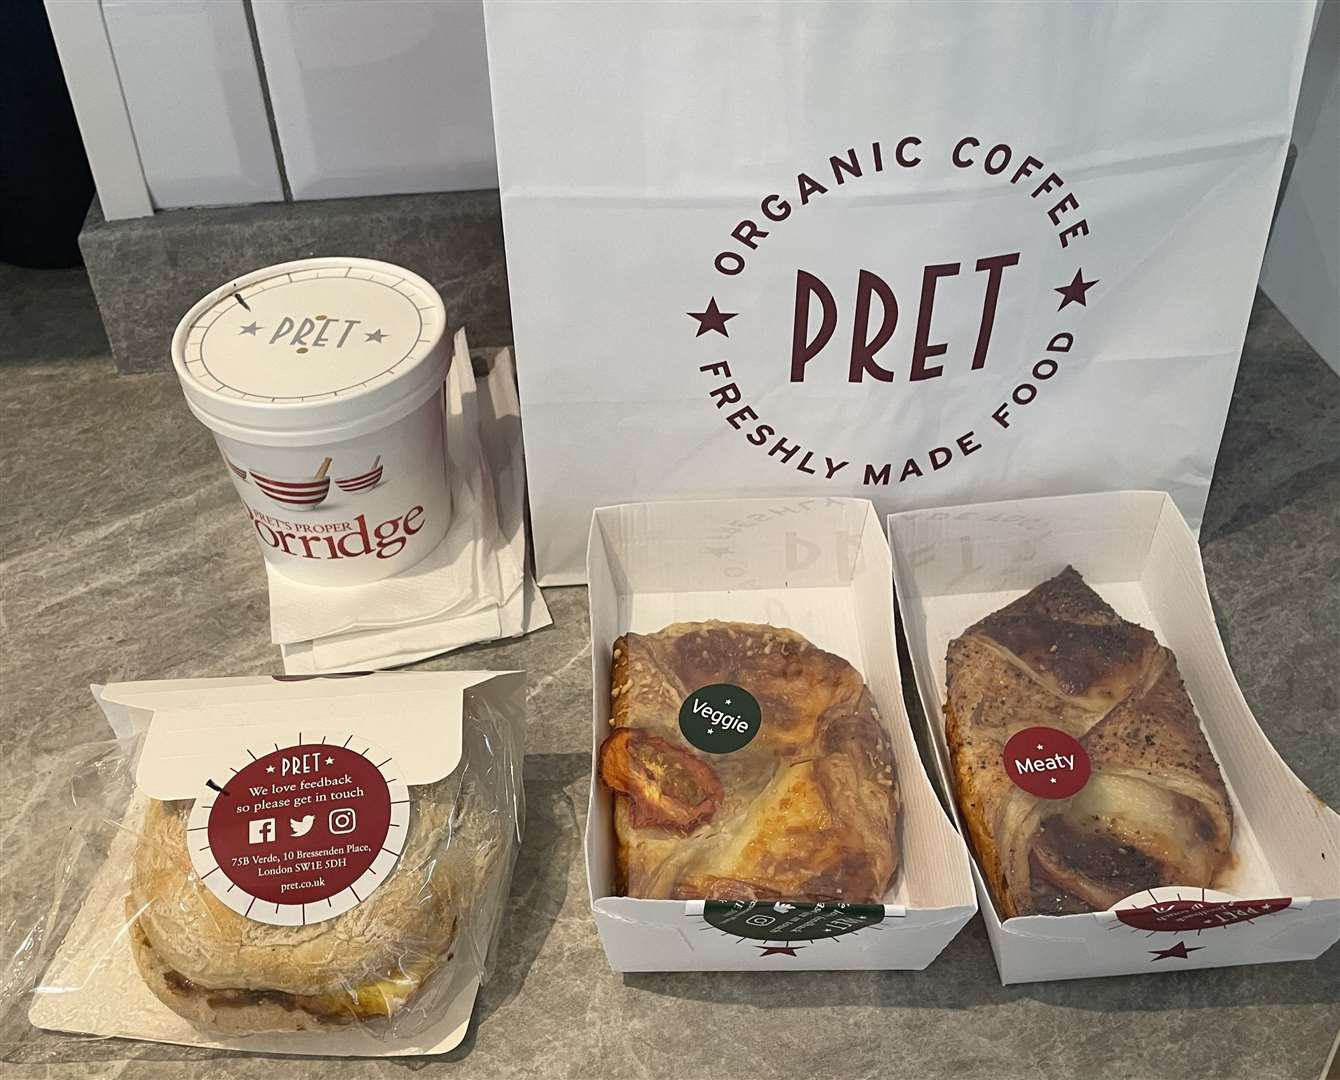 Pret a Manger's £3 breakfast bag from the Too Good To Goo app in Maidstone (57823152)